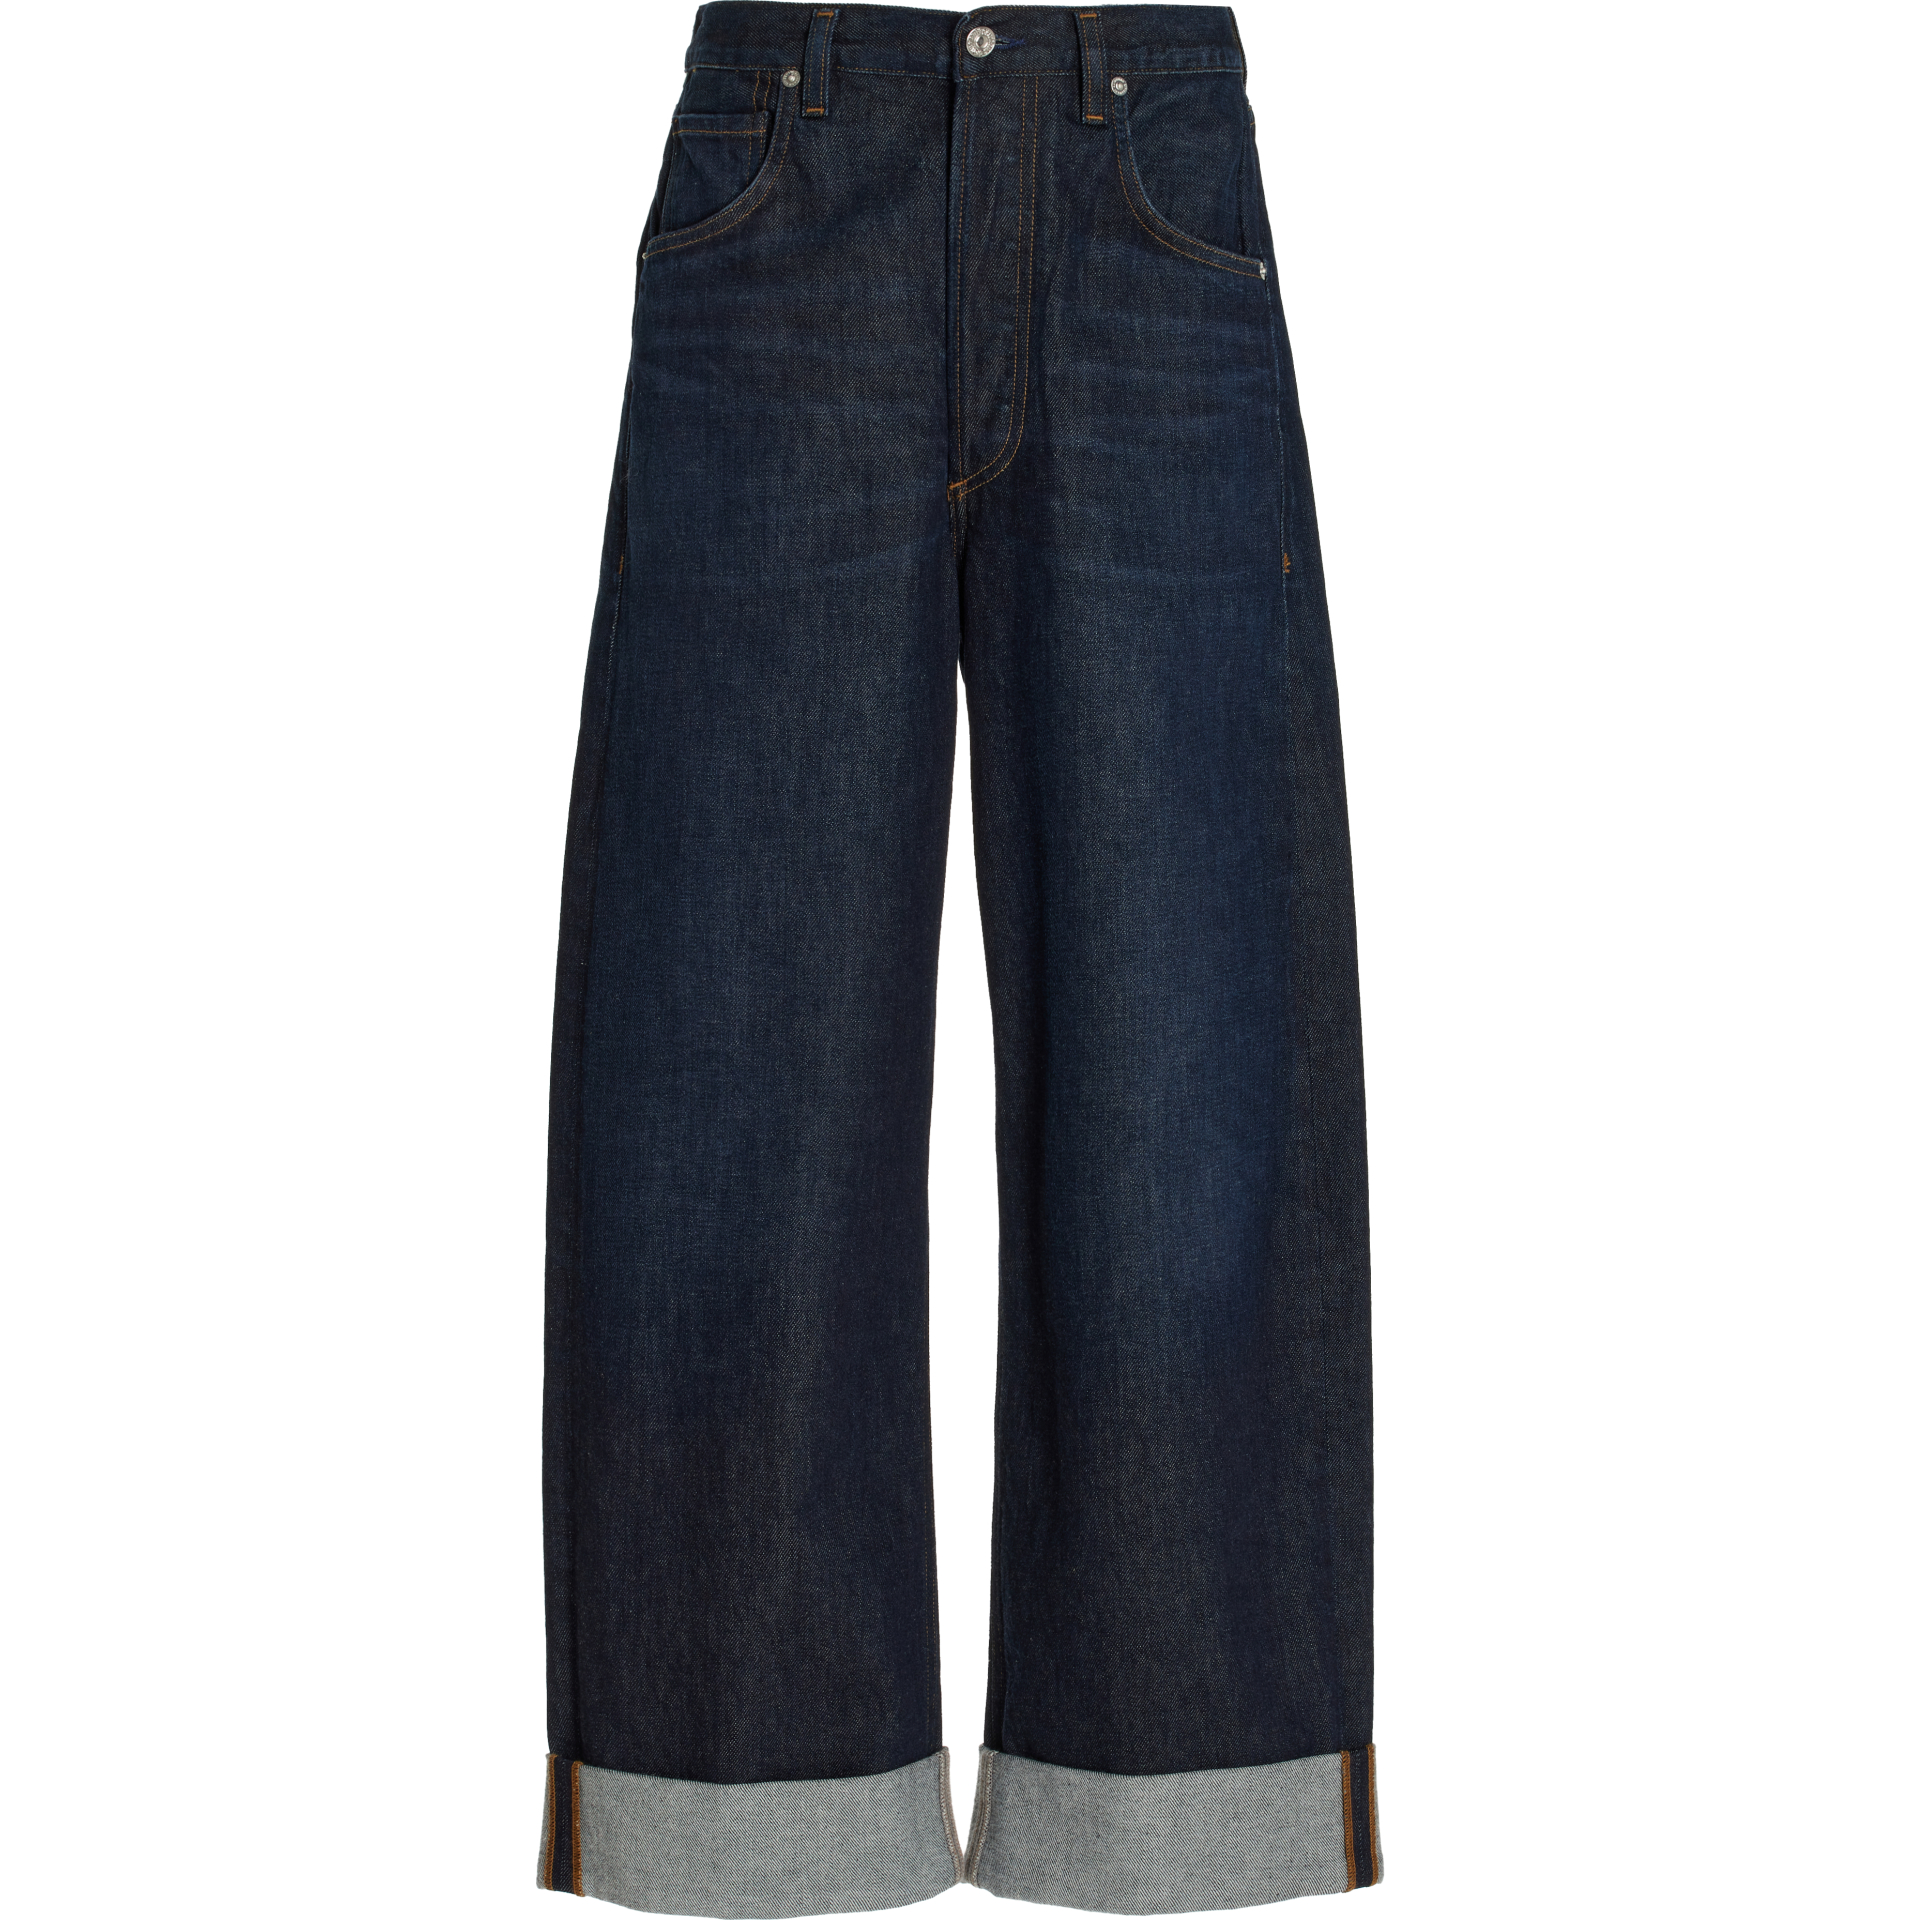 Citizens of Humanity Ayla Baggy Cuffed Cropped Jeans
